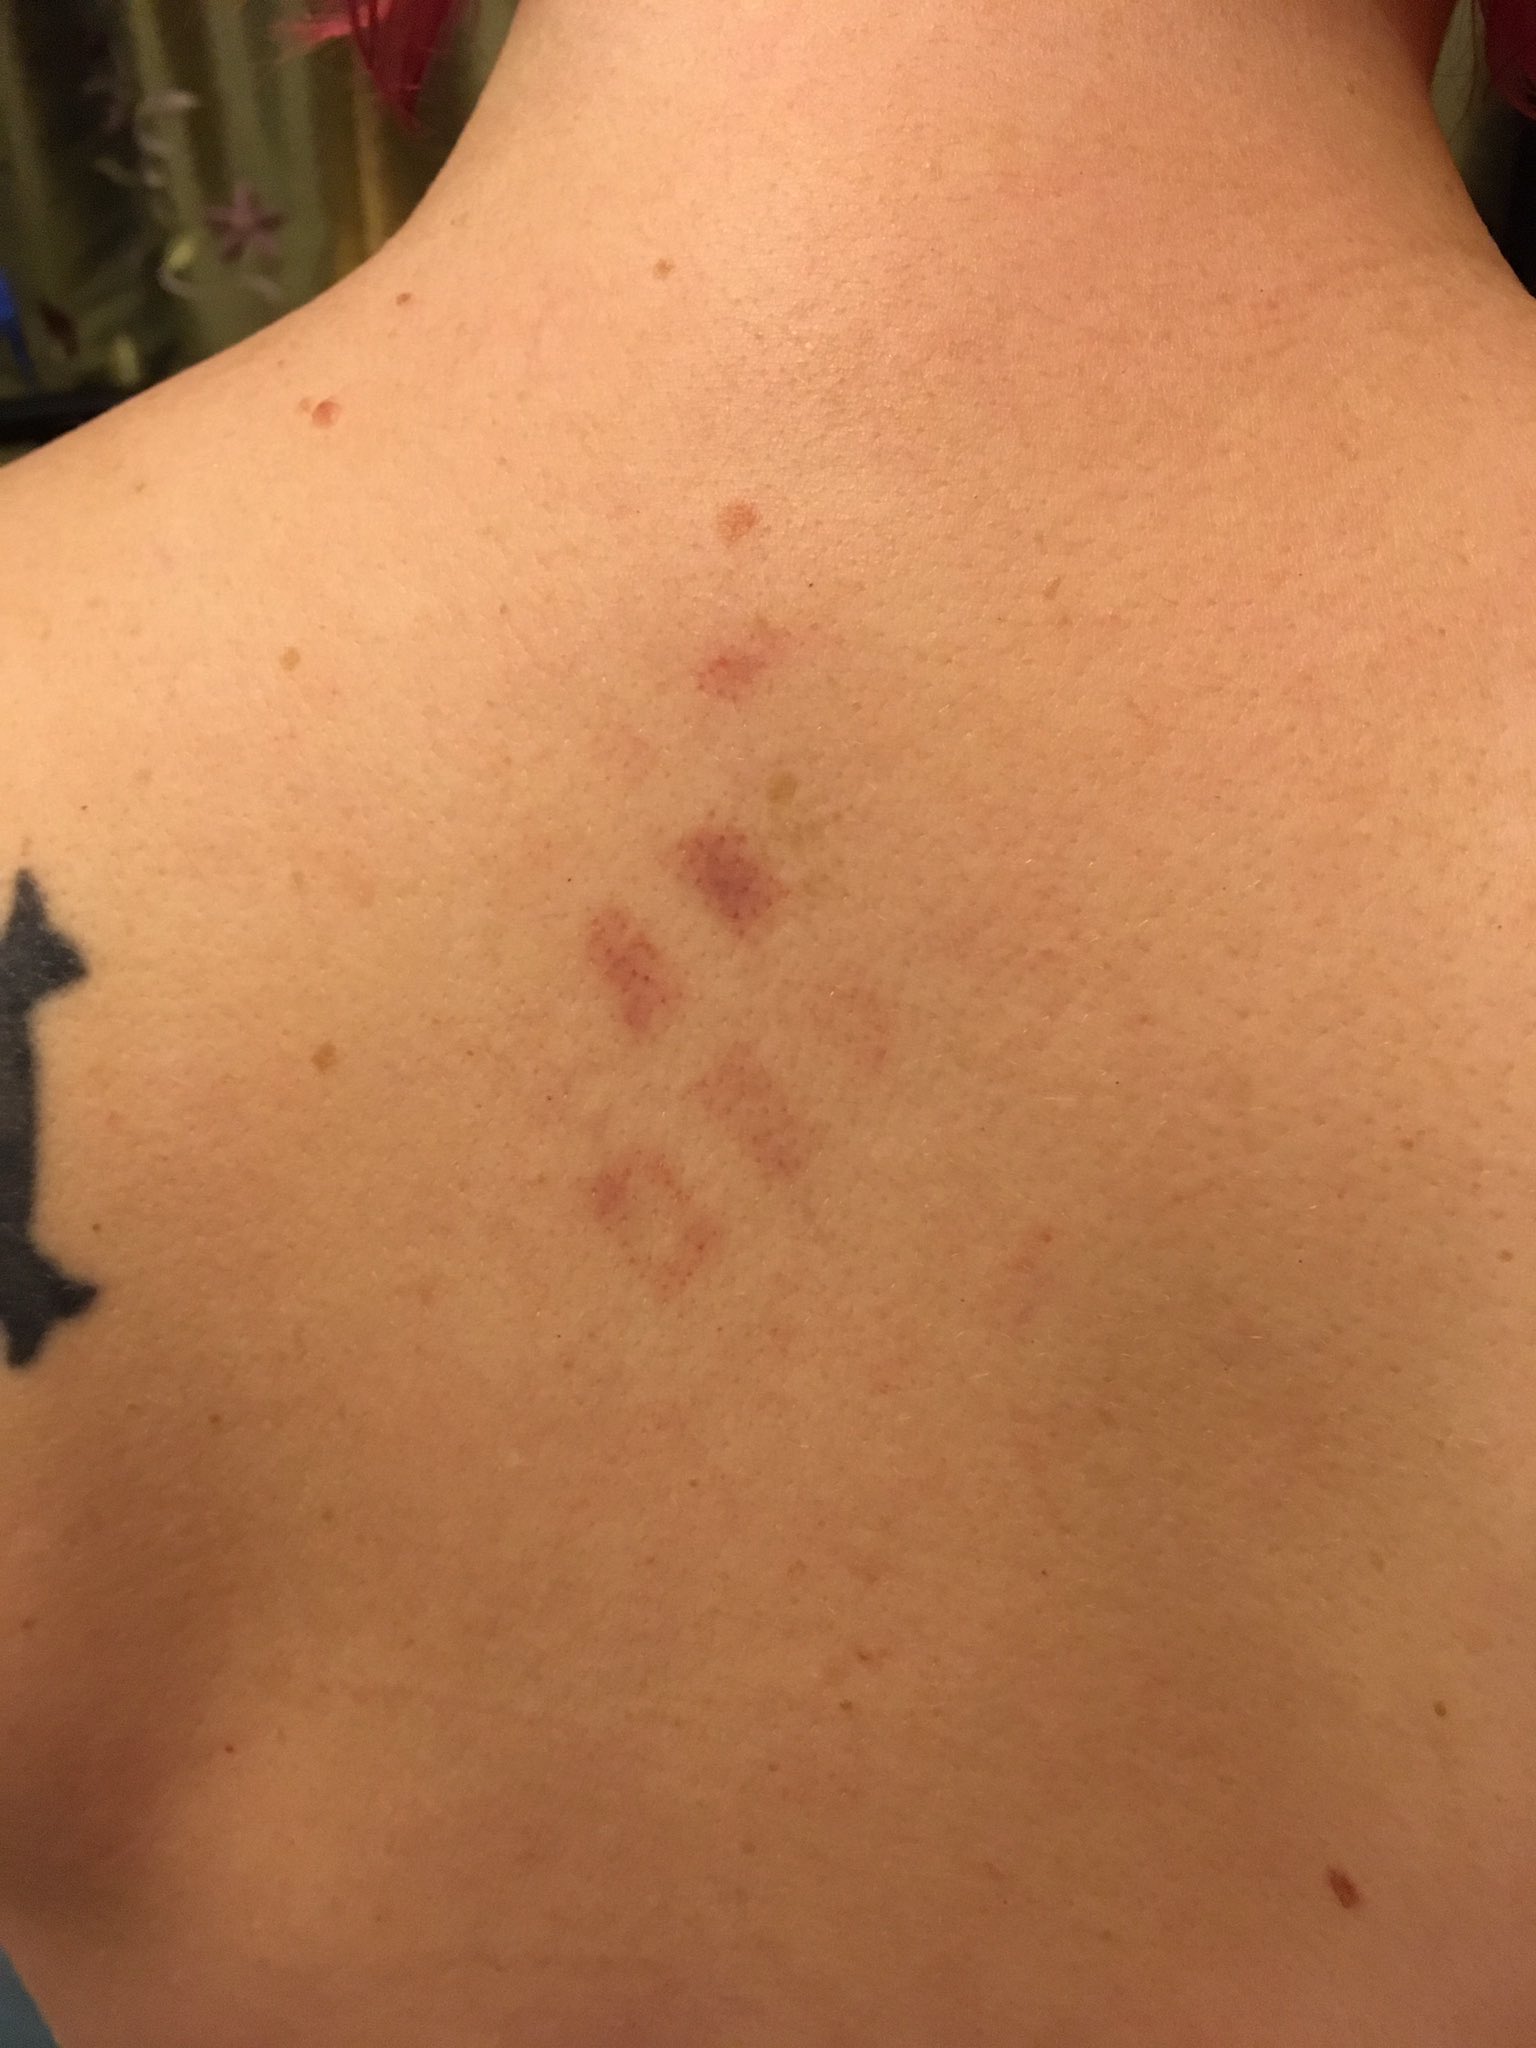 Kat Stark on X: Mysterious crosshatch bruise appeared on my back